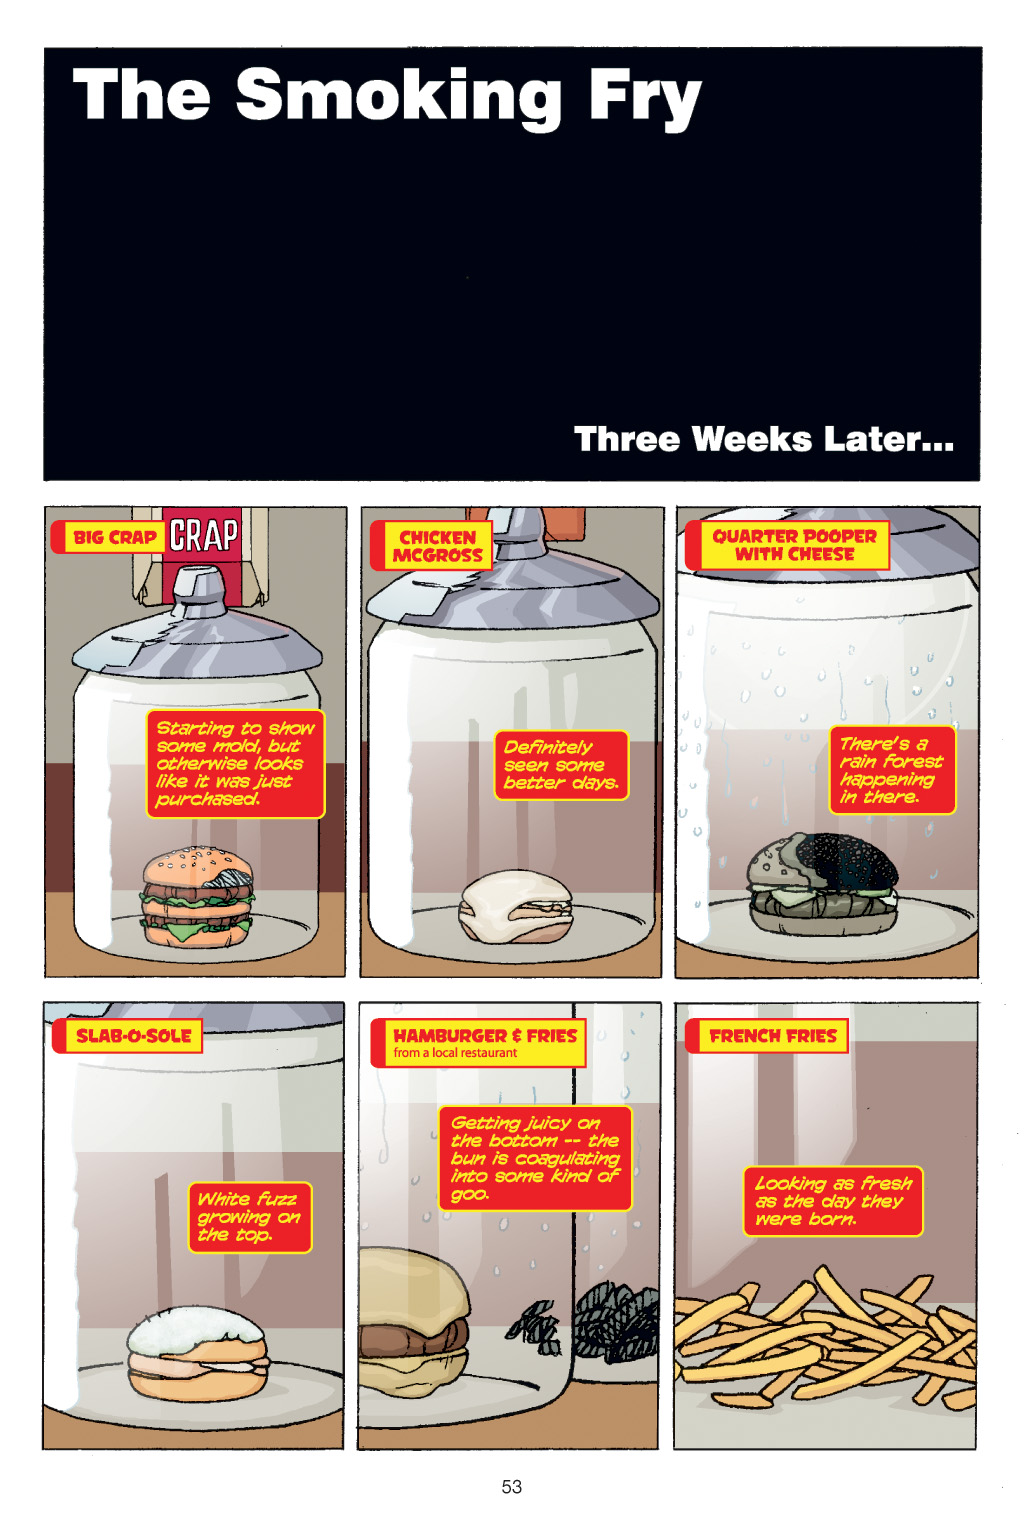 Read online Supersized: Strange Tales from a Fast-Food Culture comic -  Issue # TPB - 54